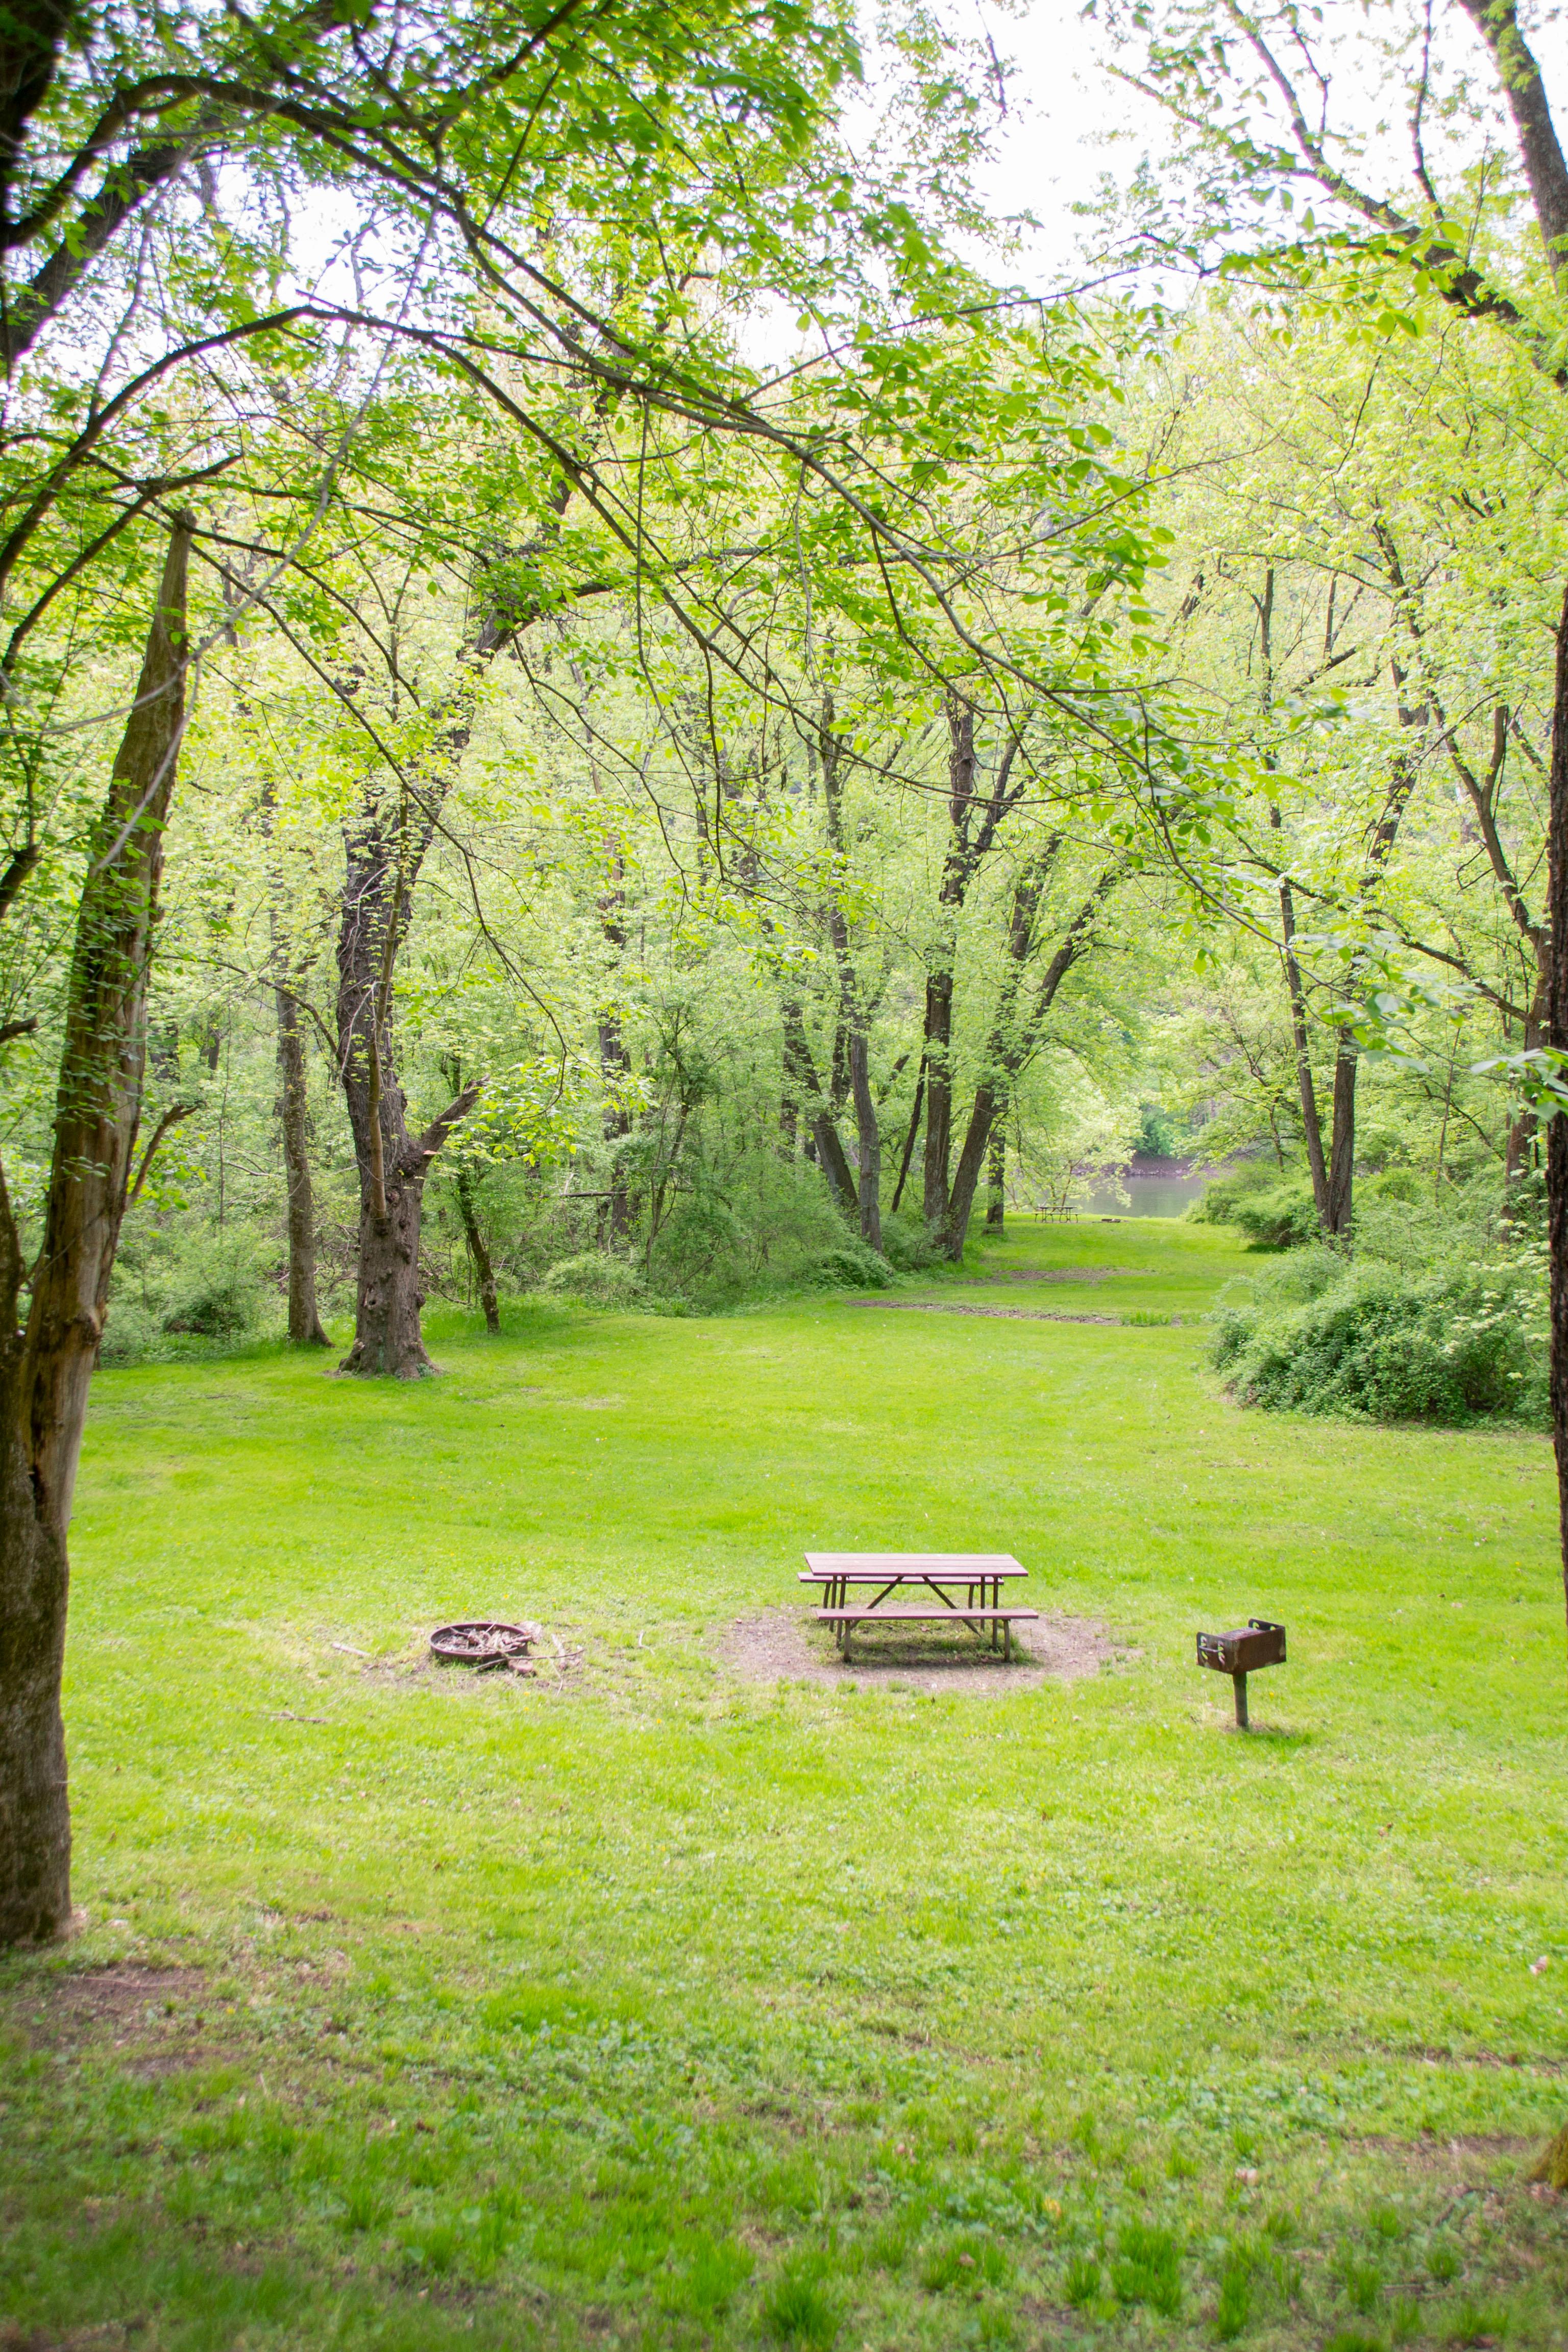 A grassy area with a picnic table, grill, and fire pit.